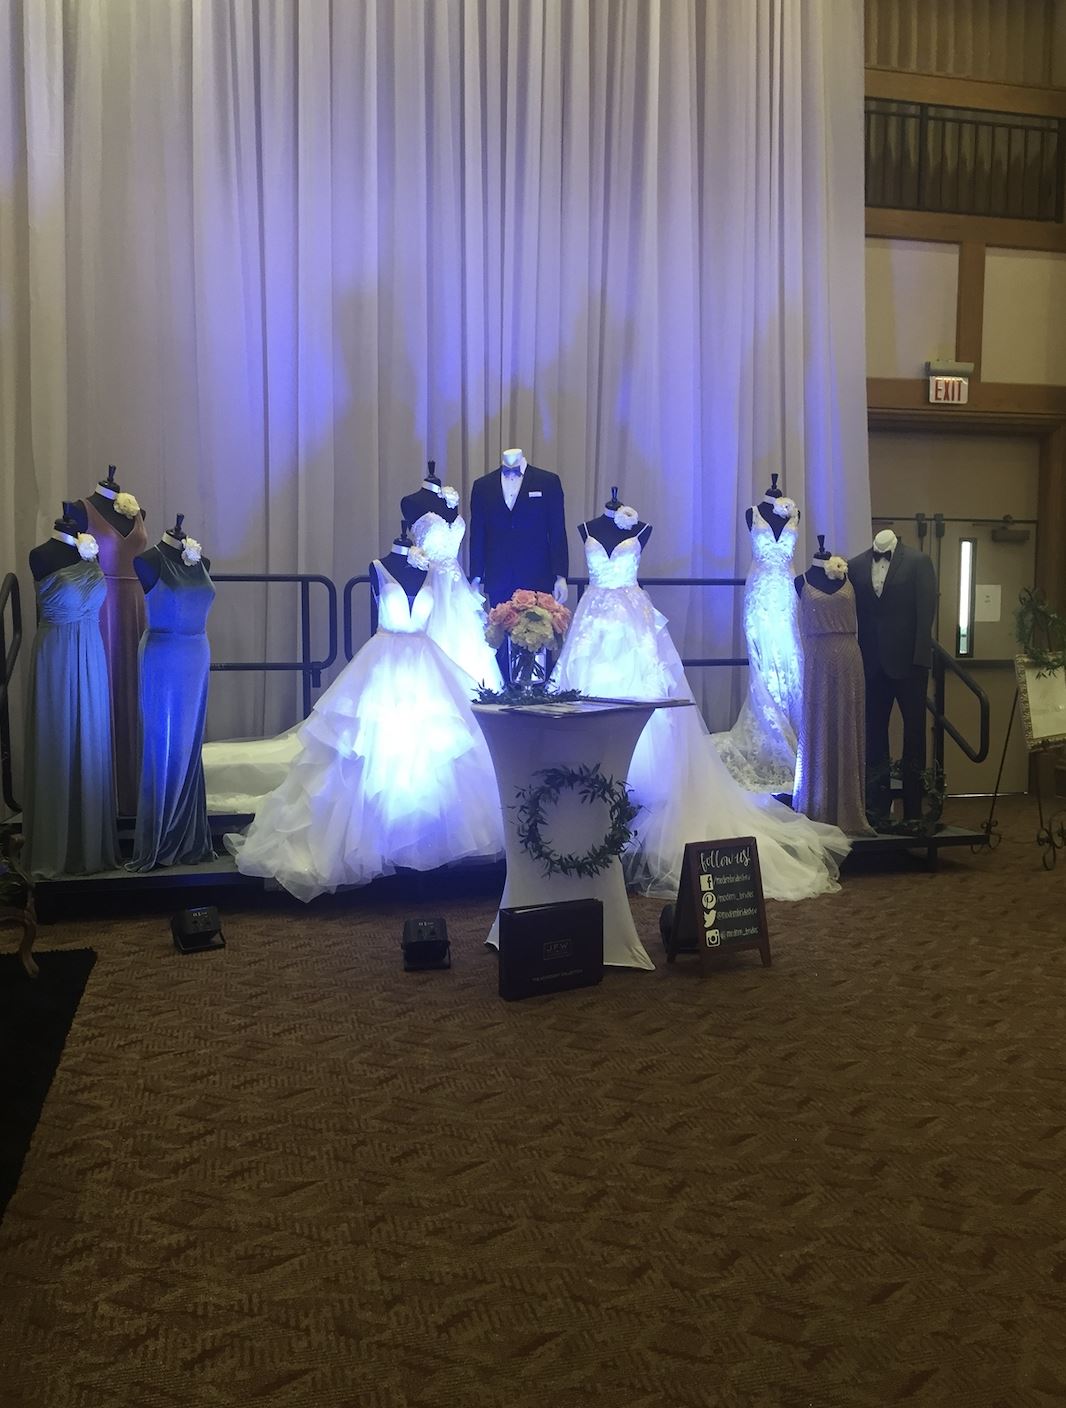 Photo of the bridal gowns and tuxedo with a bouquet